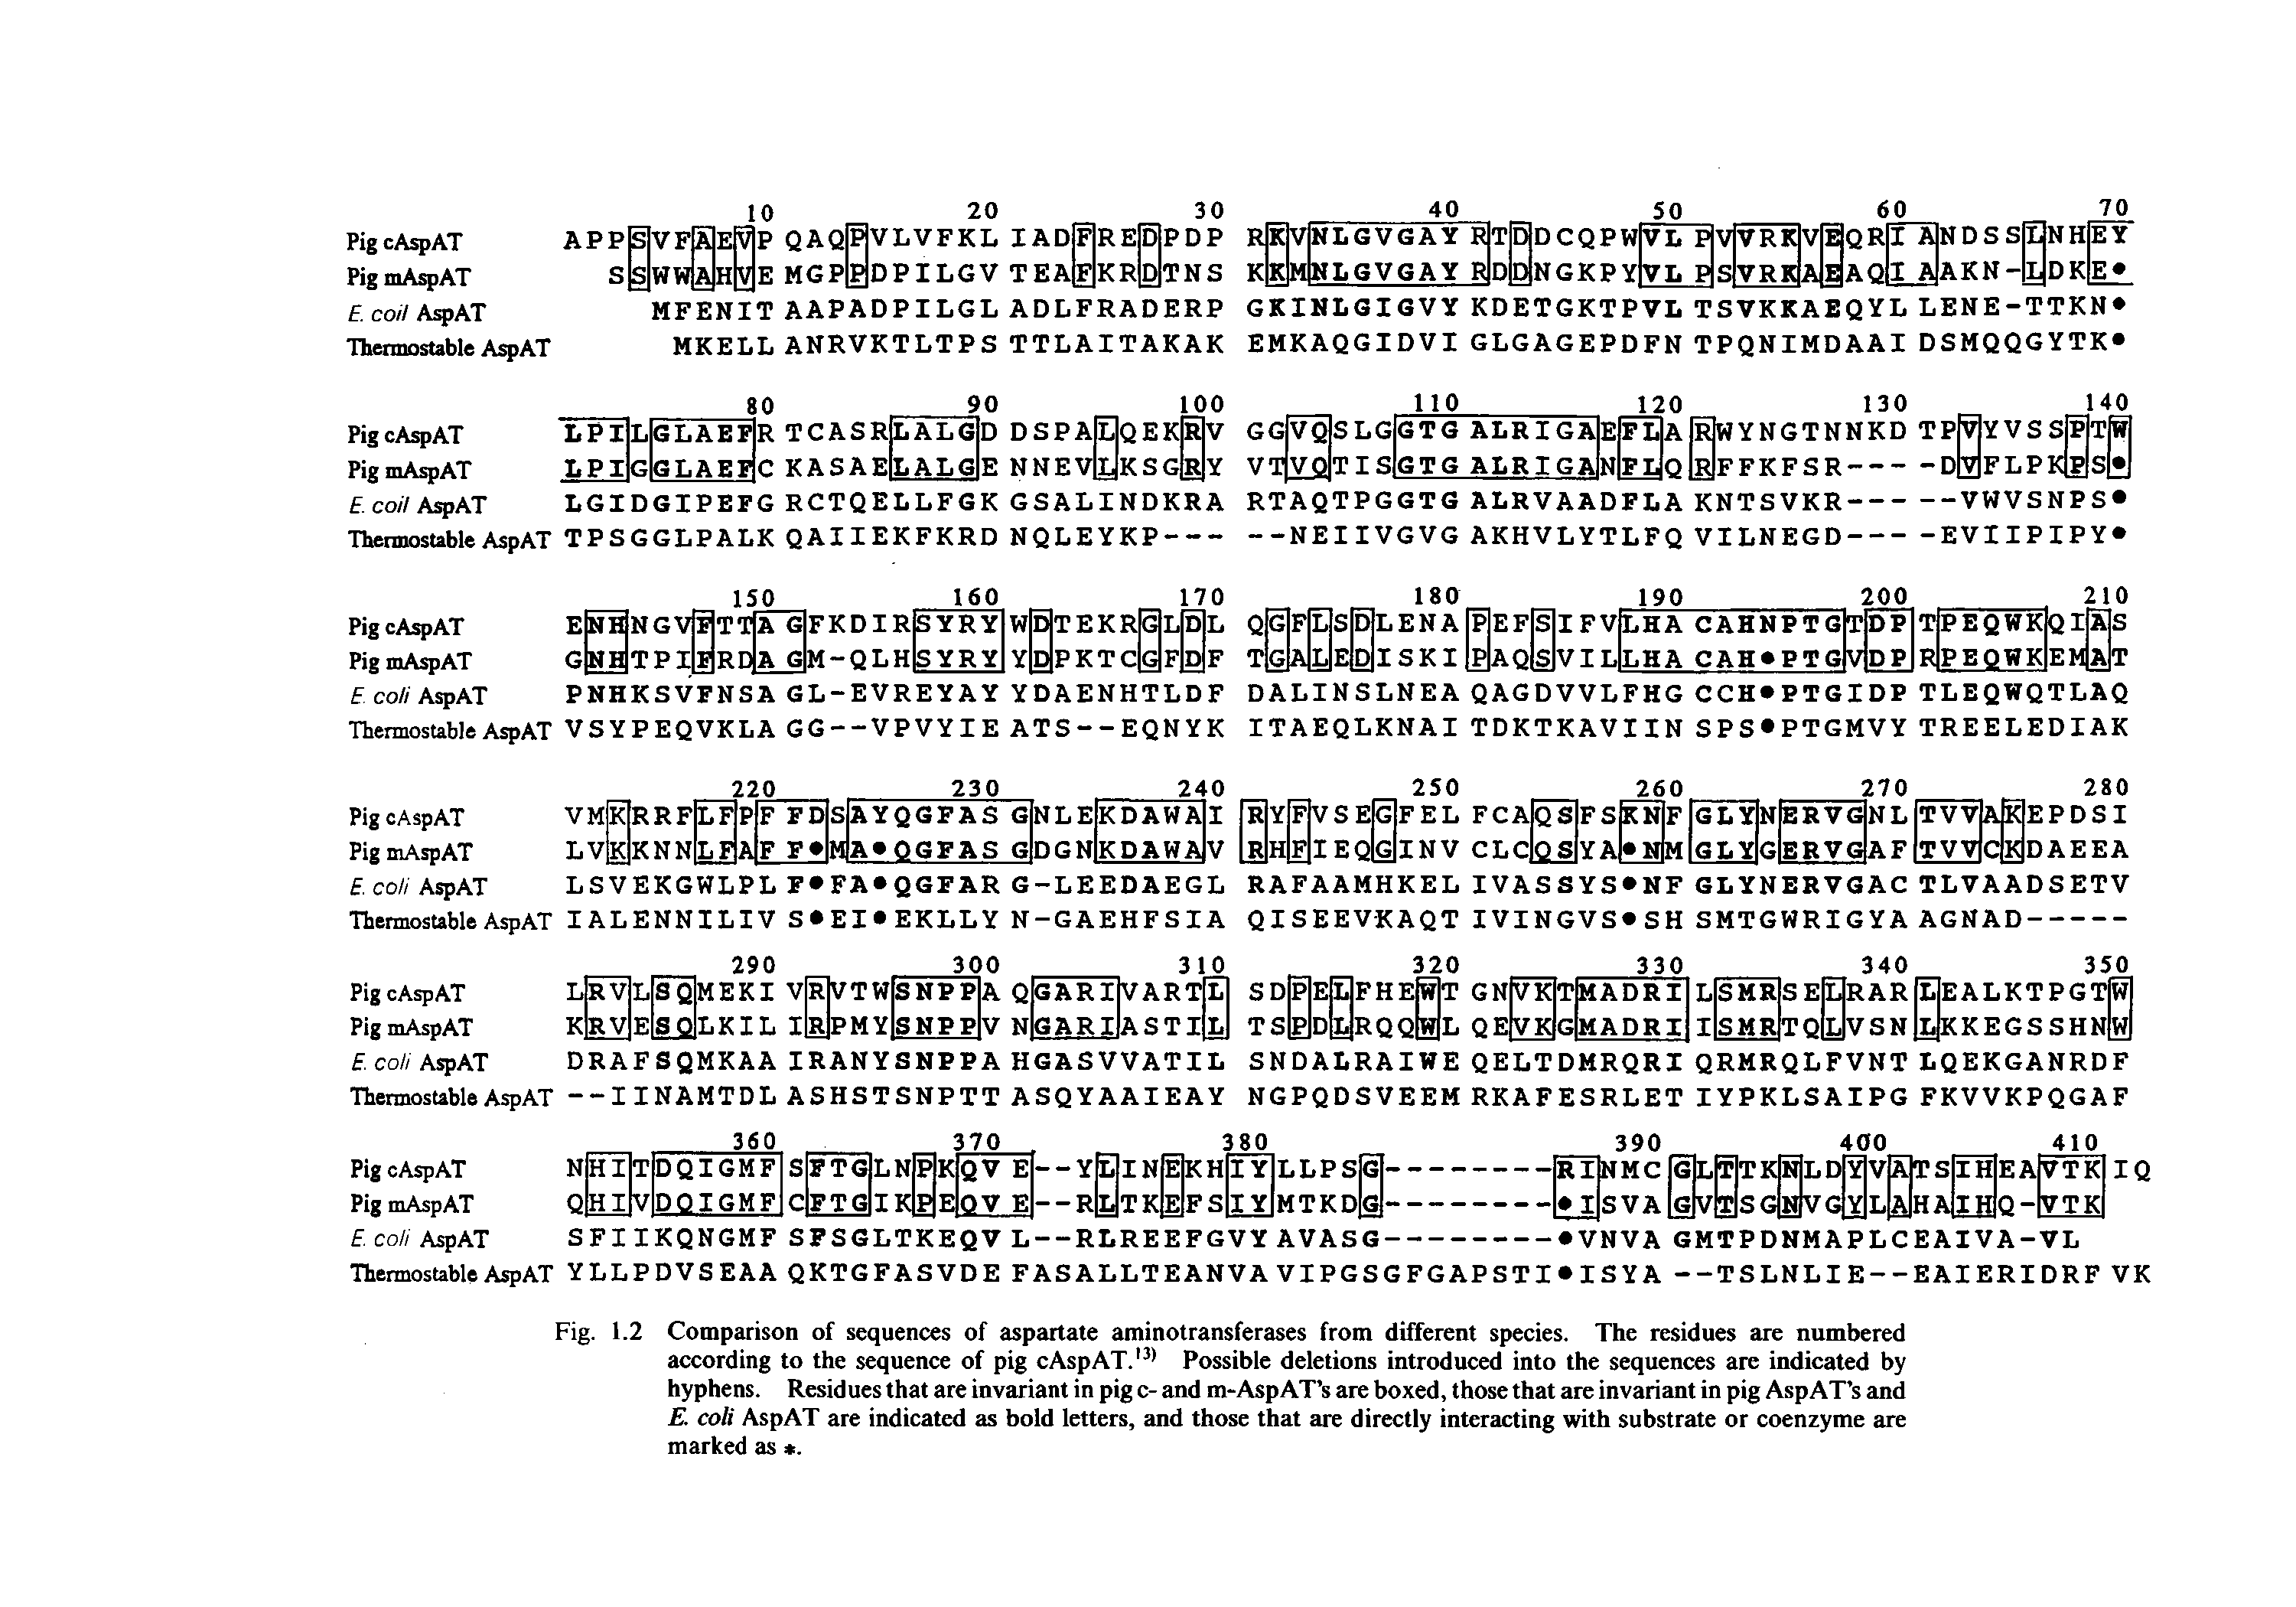 Fig. 1.2 Comparison of sequences of aspartate aminotransferases from different species. The residues are numbered according to the sequence of pig cAspAT.13 Possible deletions introduced into the sequences are indicated by hyphens. Residues that are invariant in pig c- and m-AspAT s are boxed, those that are invariant in pig AspAT s and coli AspAT are indicated as bold letters, and those that are directly interacting with substrate or coenzyme are marked as. ...